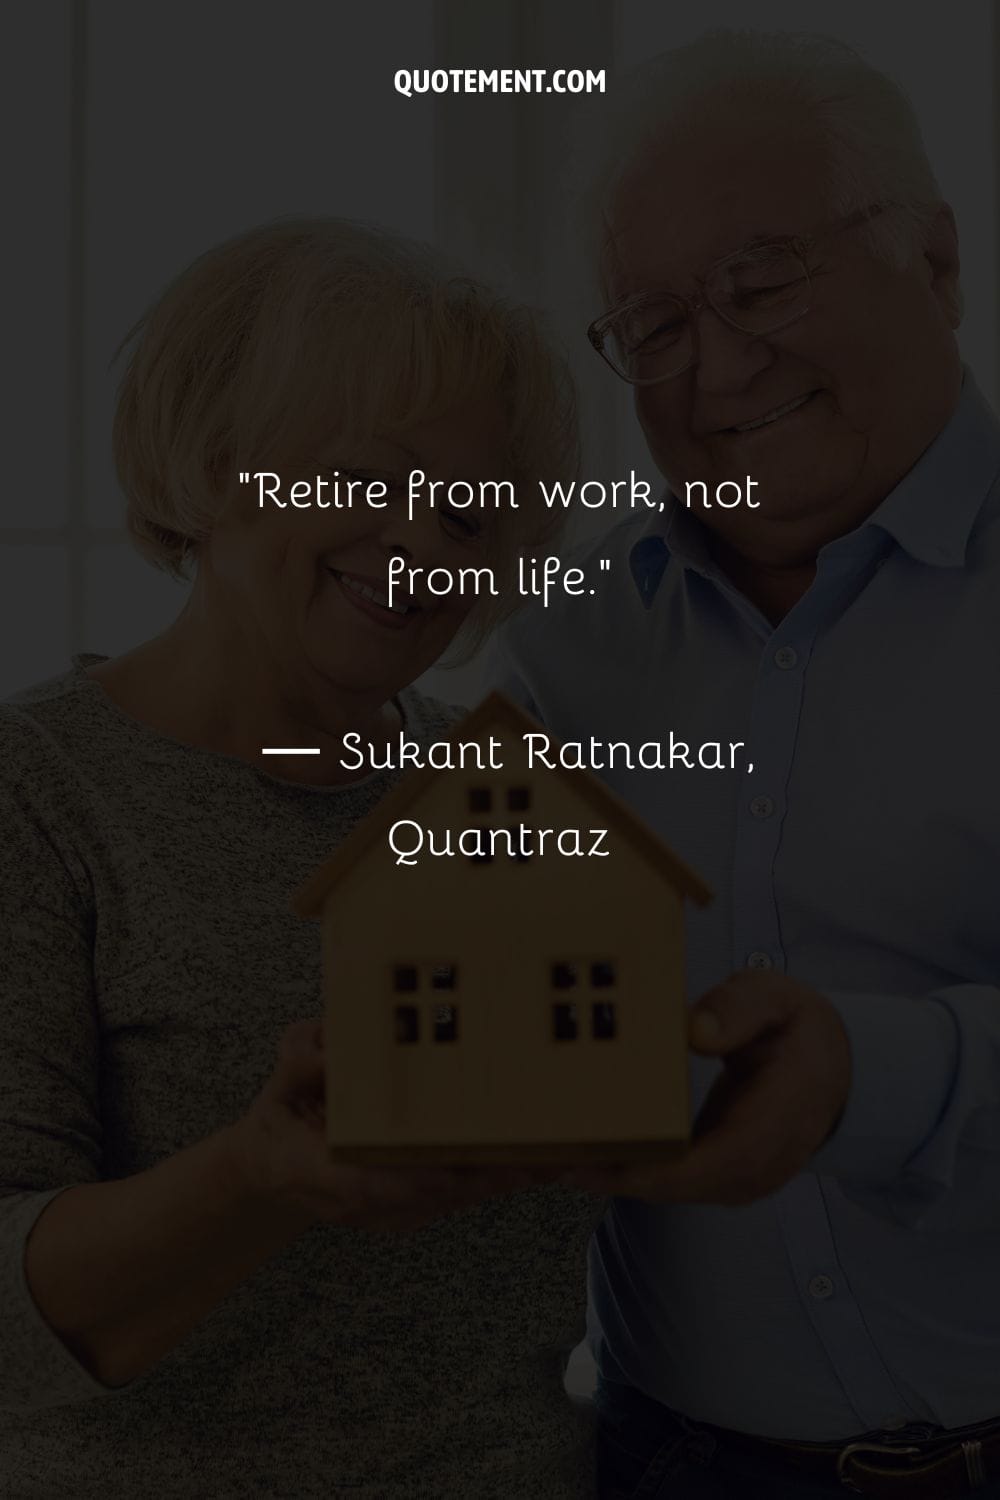 An older couple smiling representing funny advice for retirement